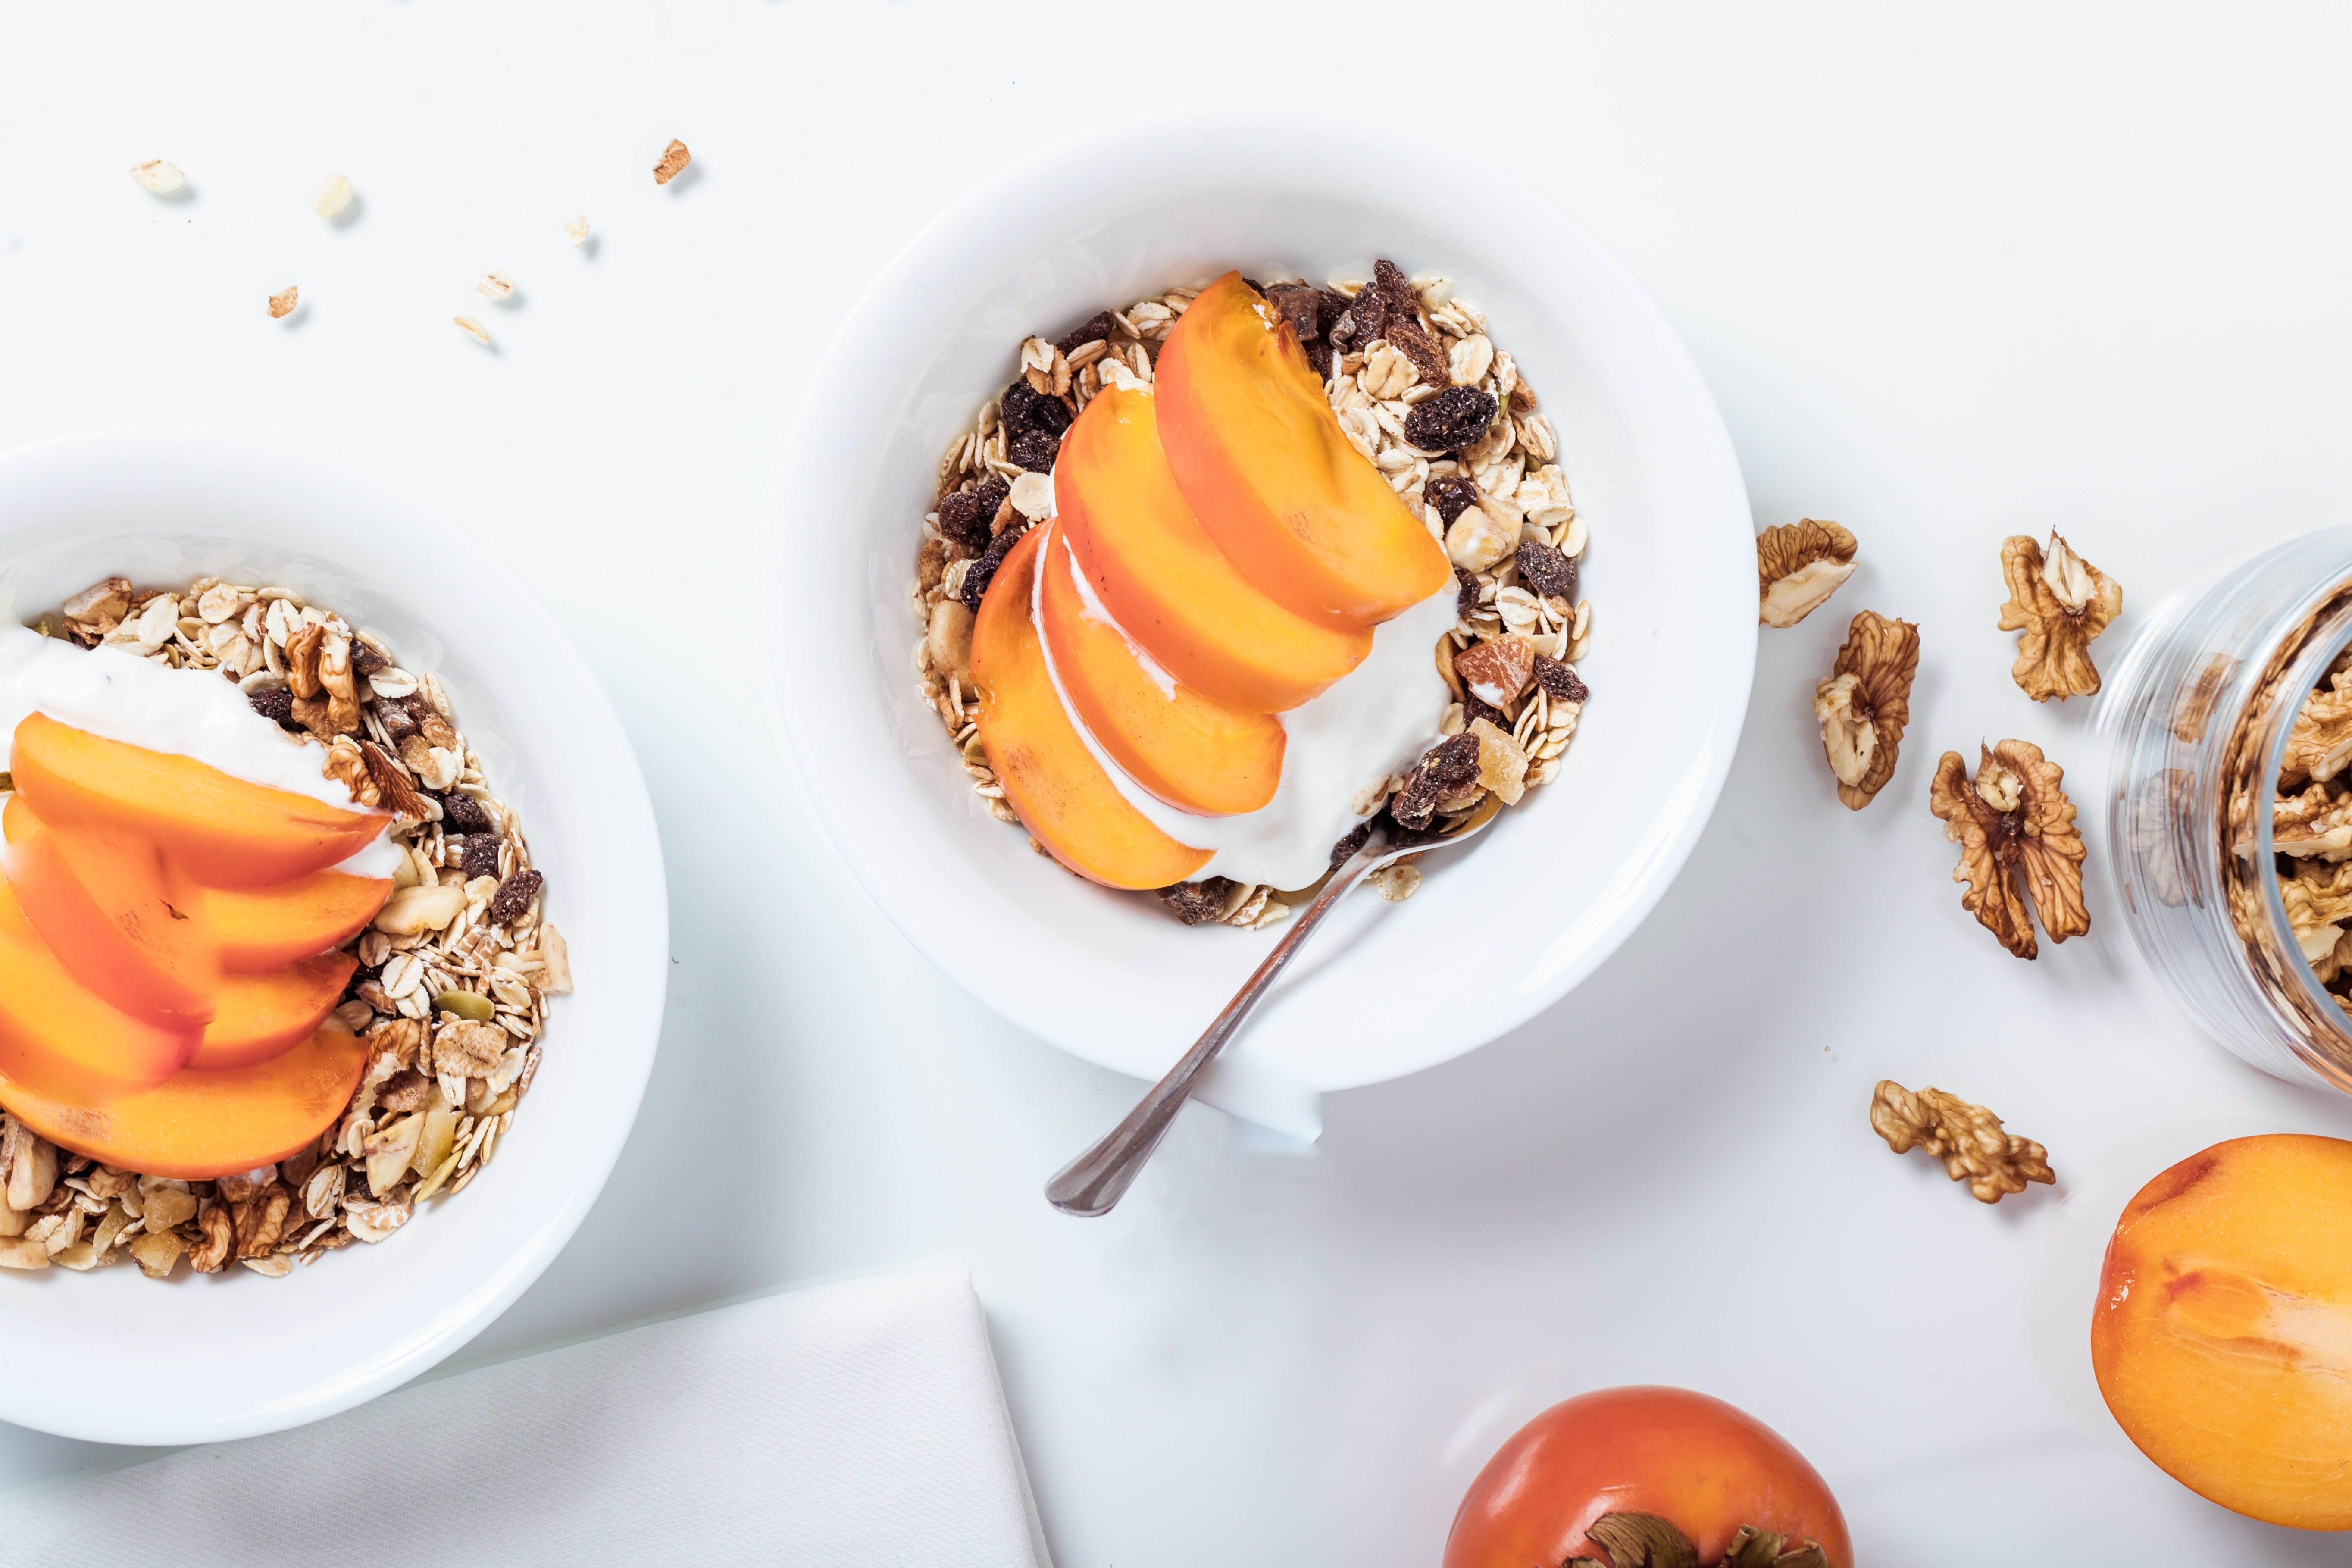 Two bowls with musli and fruit placed in a inspiring way